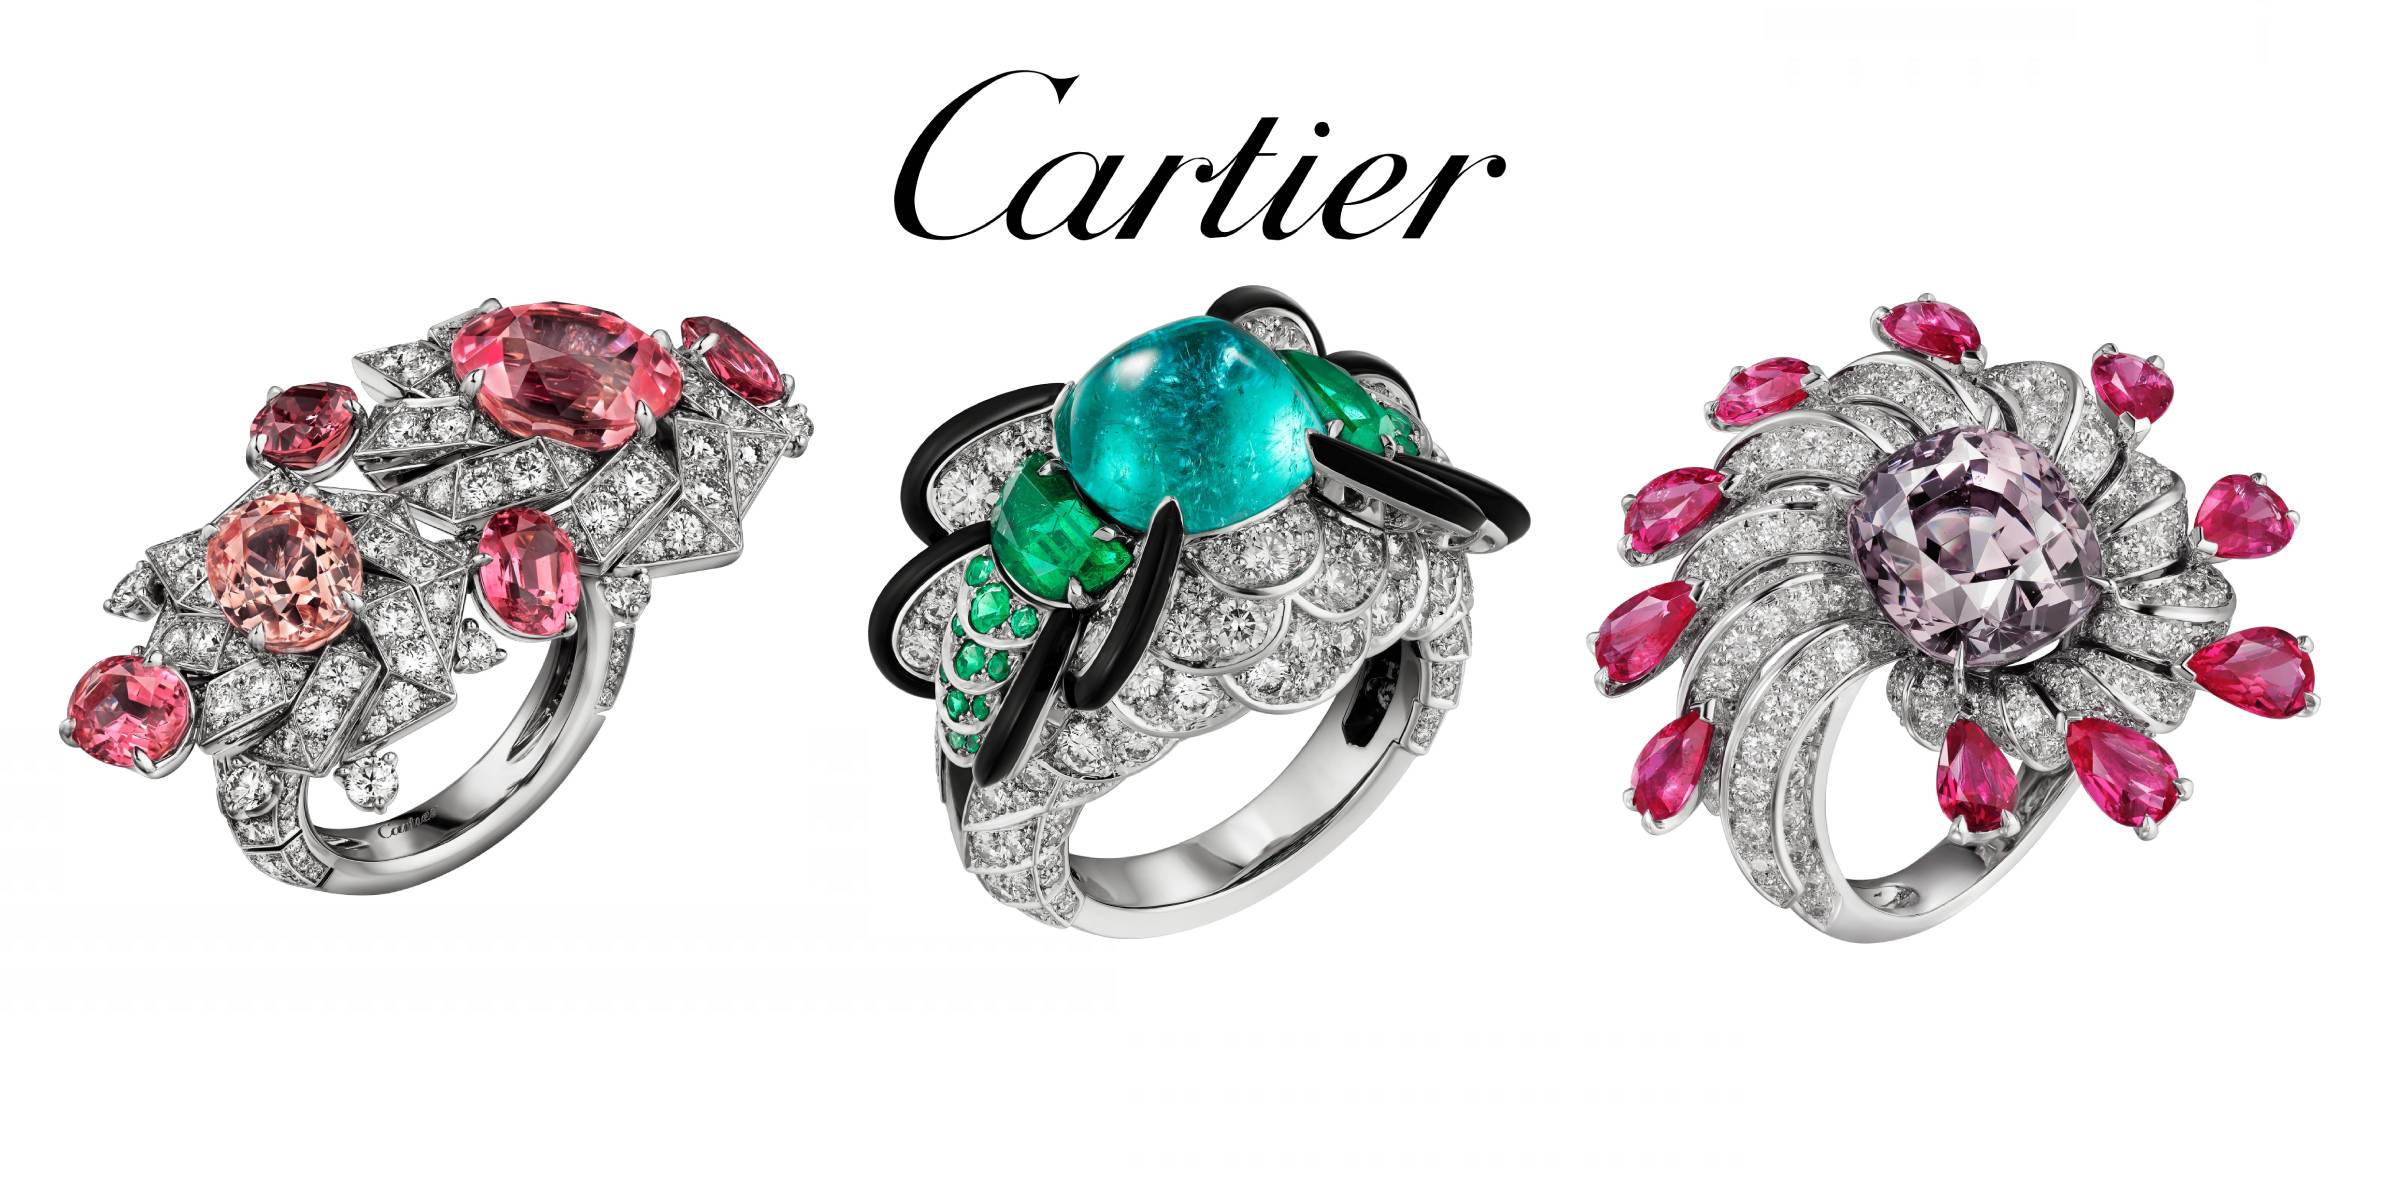 Cartier unveils new high jewellery collection in Florence